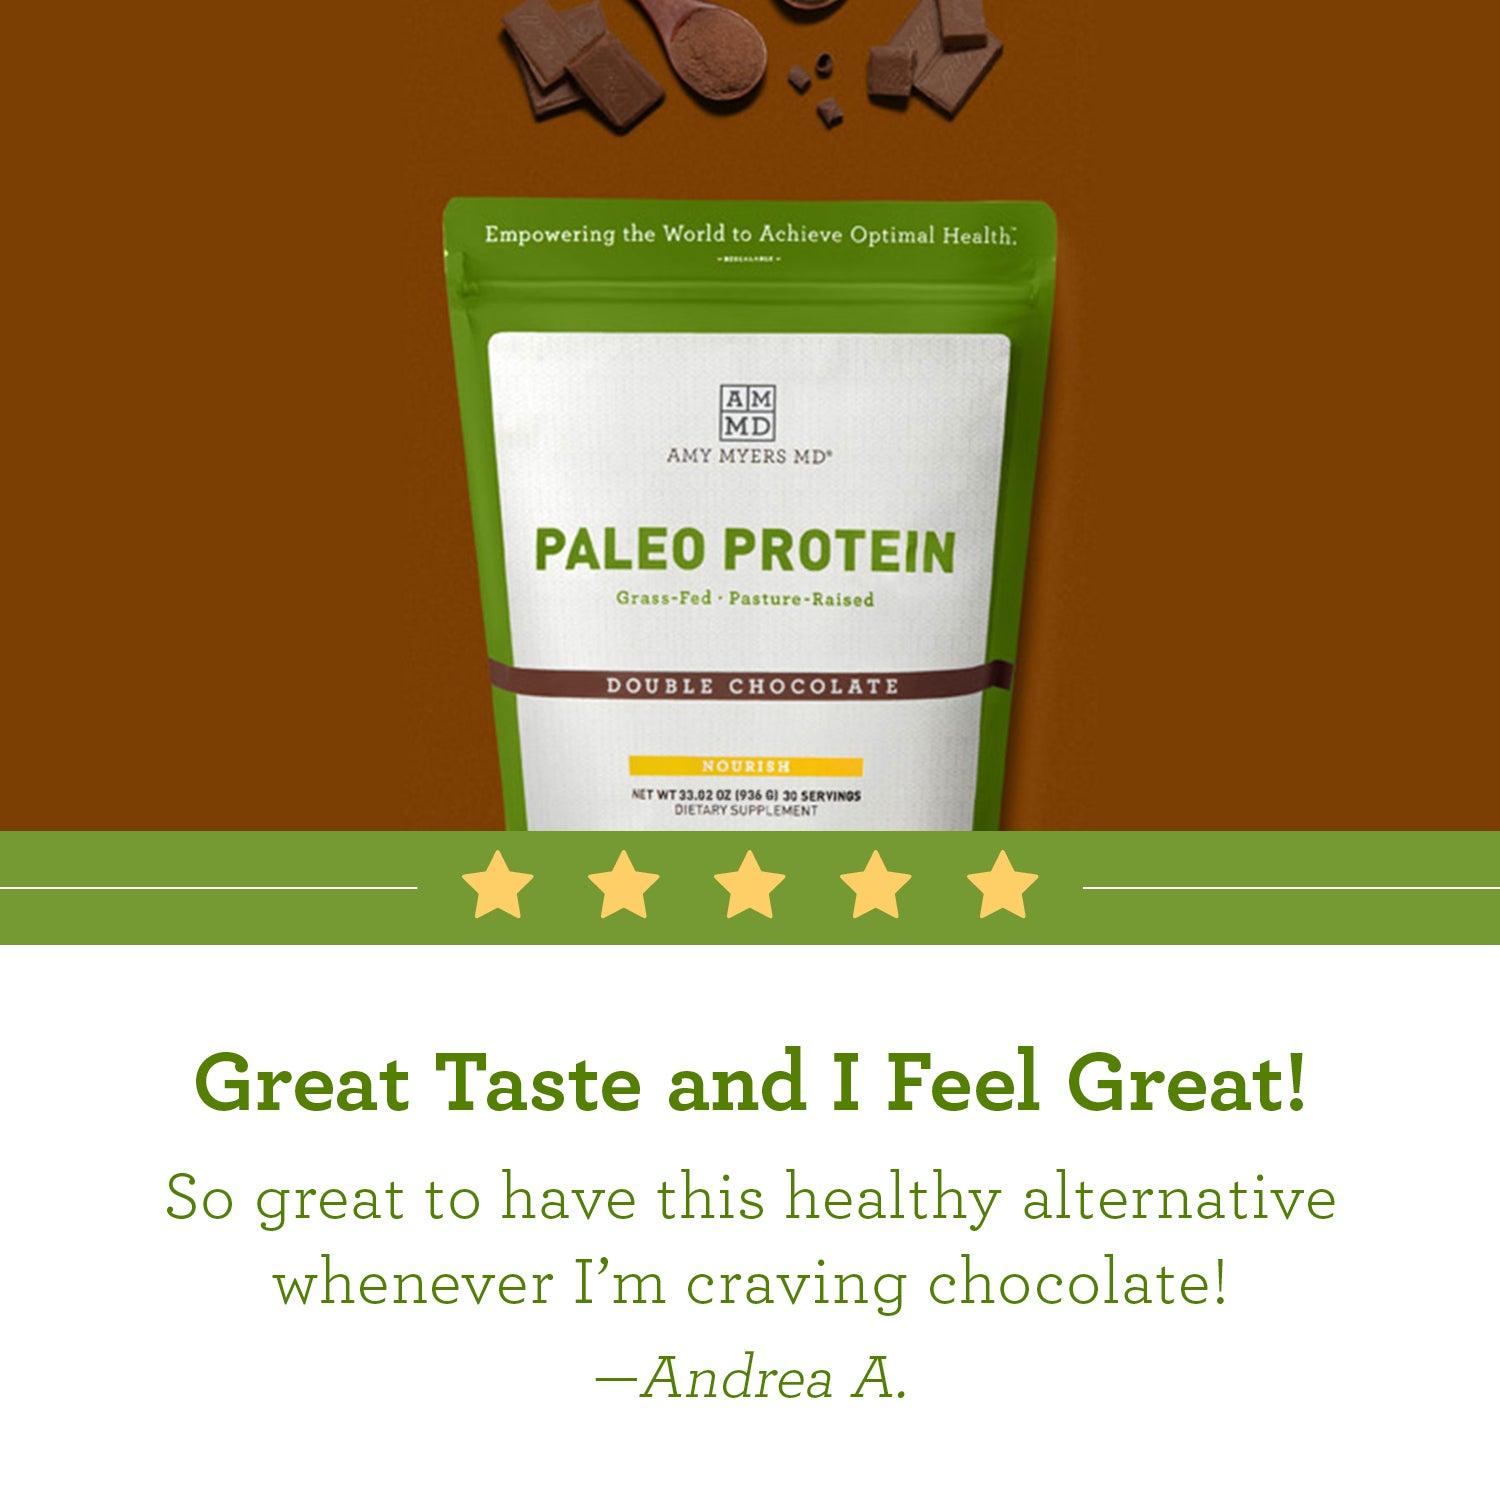 Picture of AMMD resealable bag of Double Chocolate flavored Paleo Protein with customer review quote below from Andrea A, “Great Taste and I Feel Great!”,”so great to have this healthy alternative whenever I am craving chocolate”